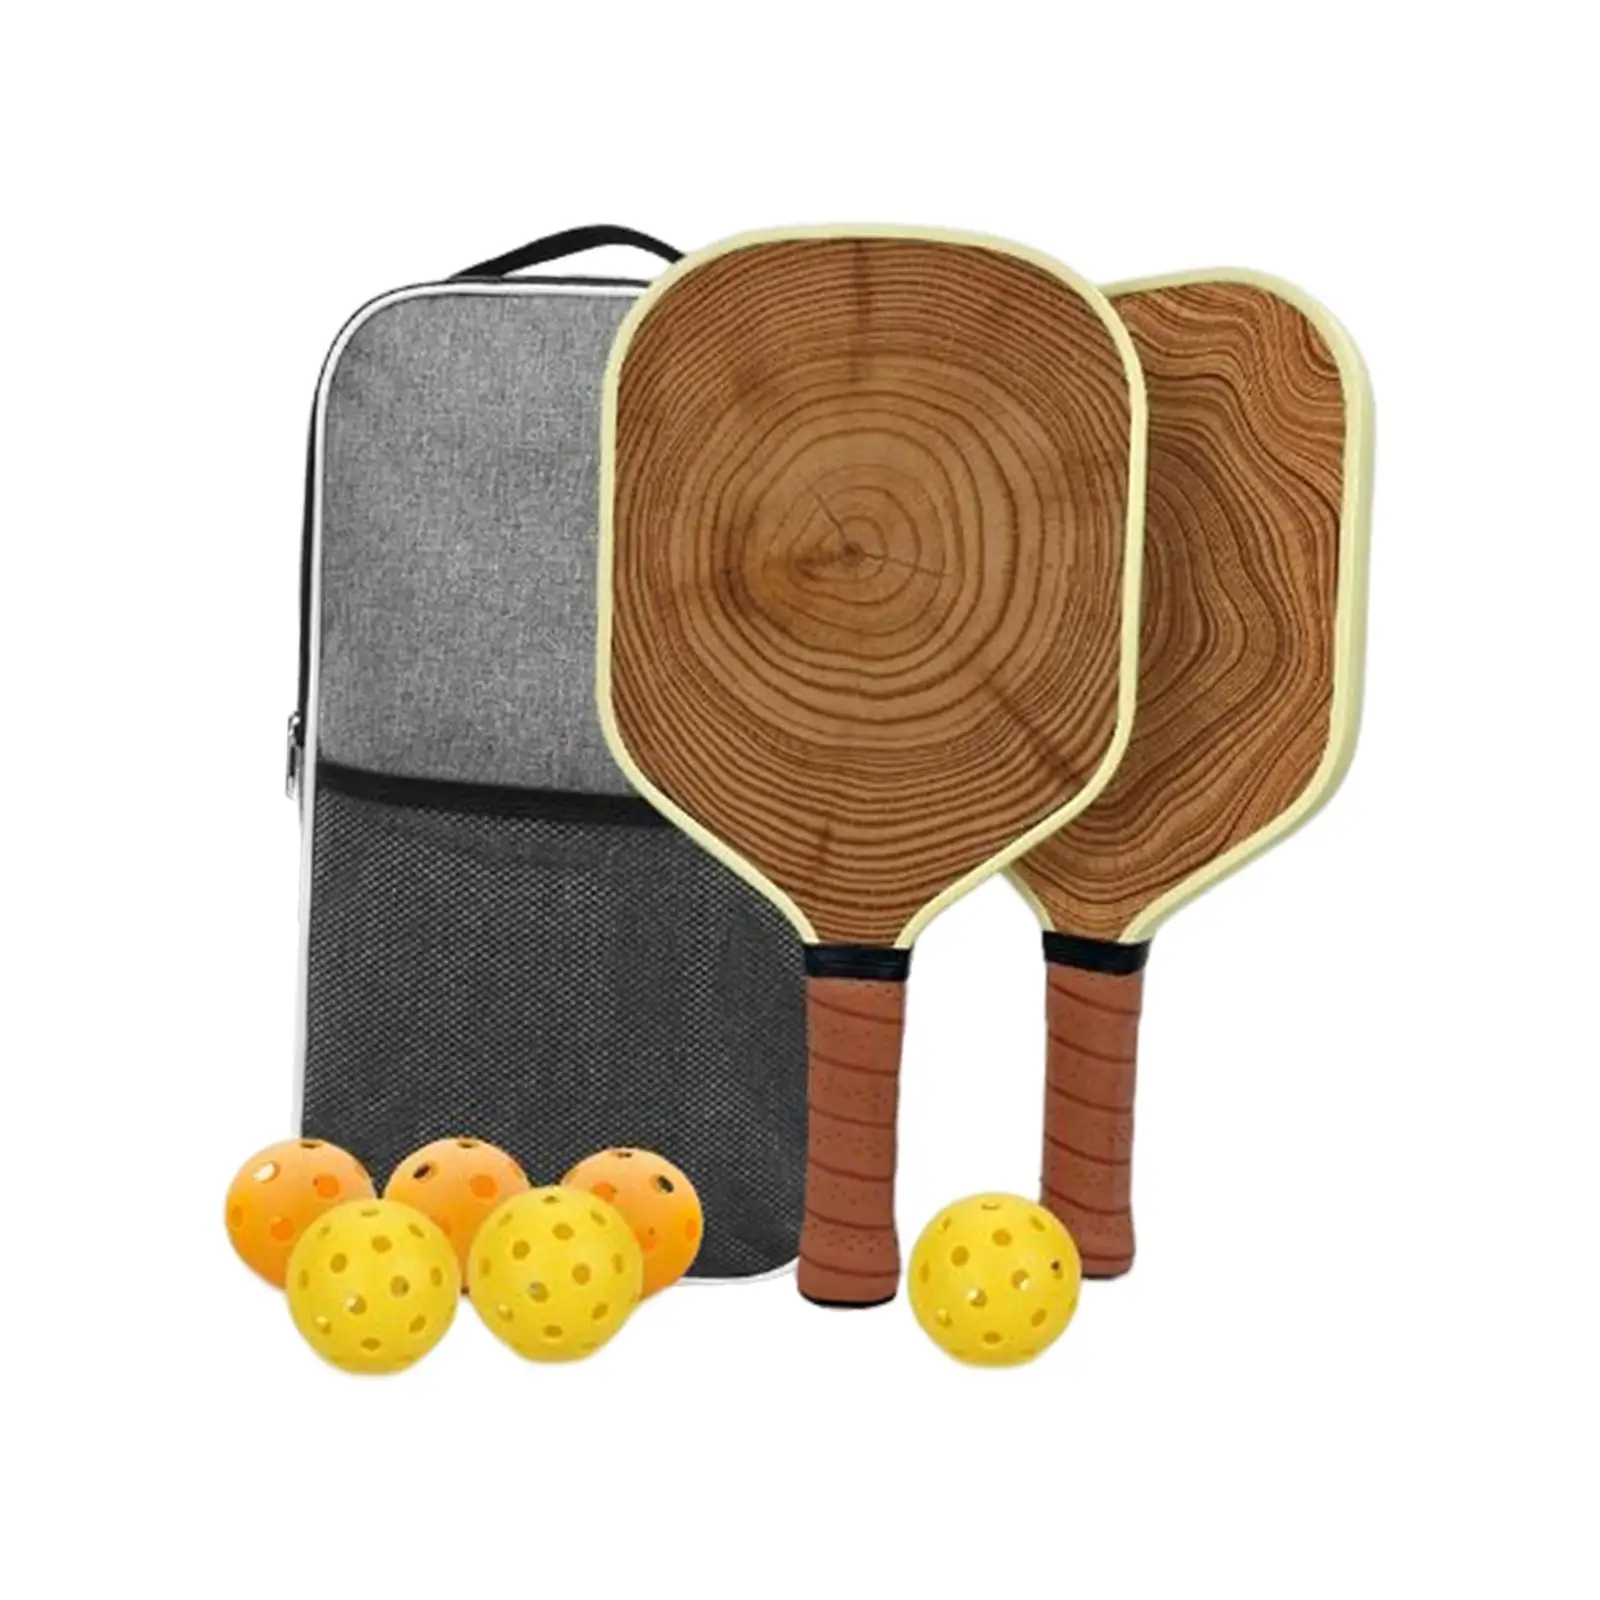 

Professional Pickleball Paddle Racket with Storage Bag 6 Balls Pickleball Rackets Racquets for Indoor and Outdoor Beginner